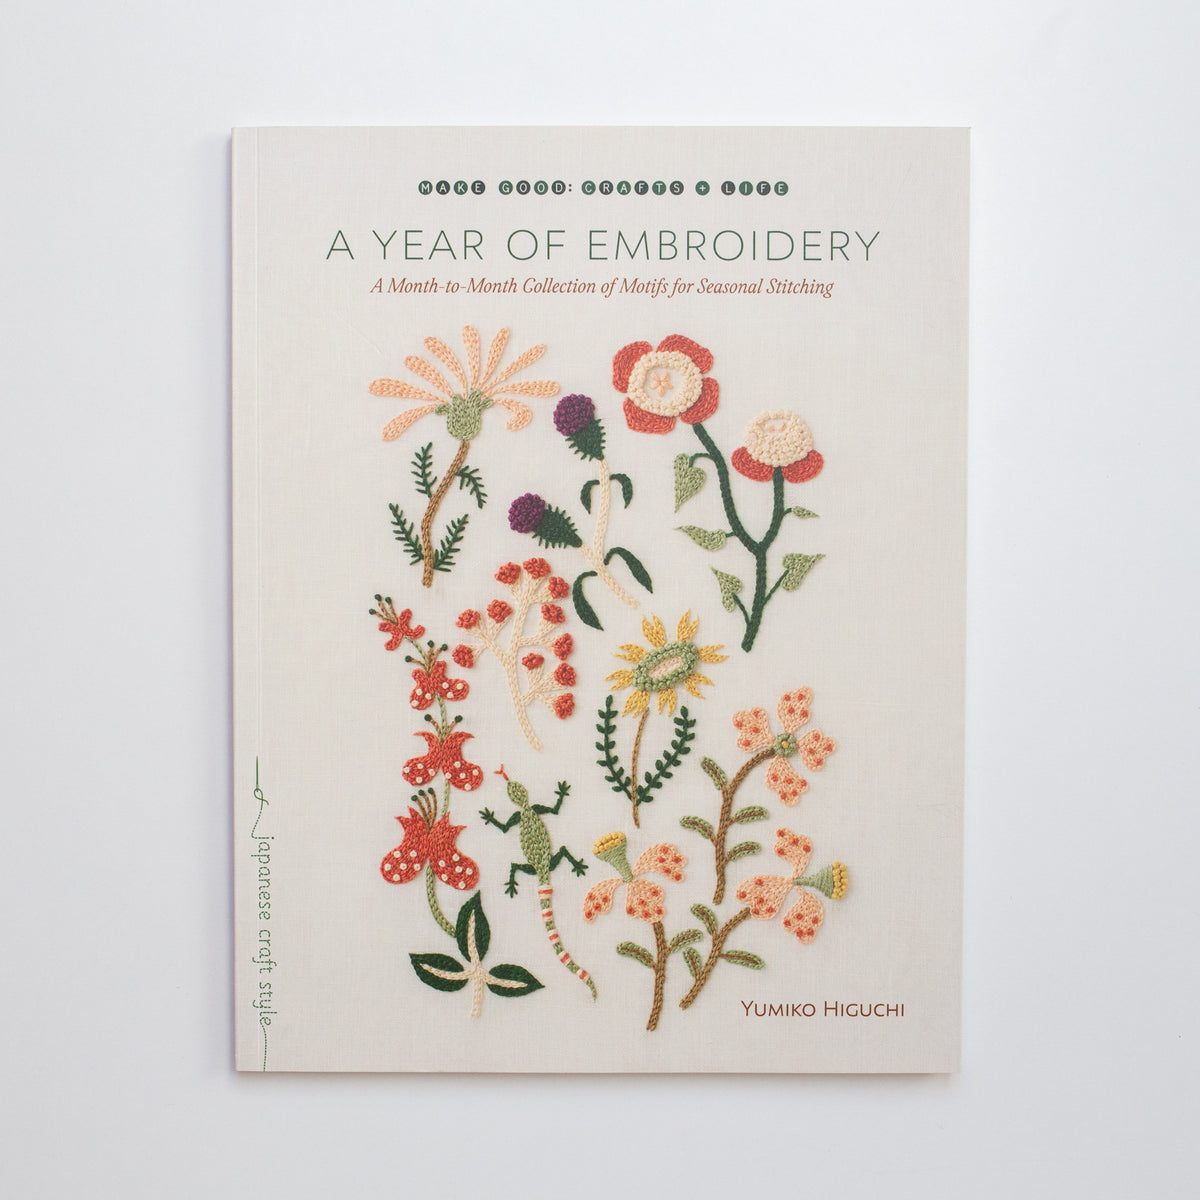 A year of Embroidery by Yumiko Higuchi